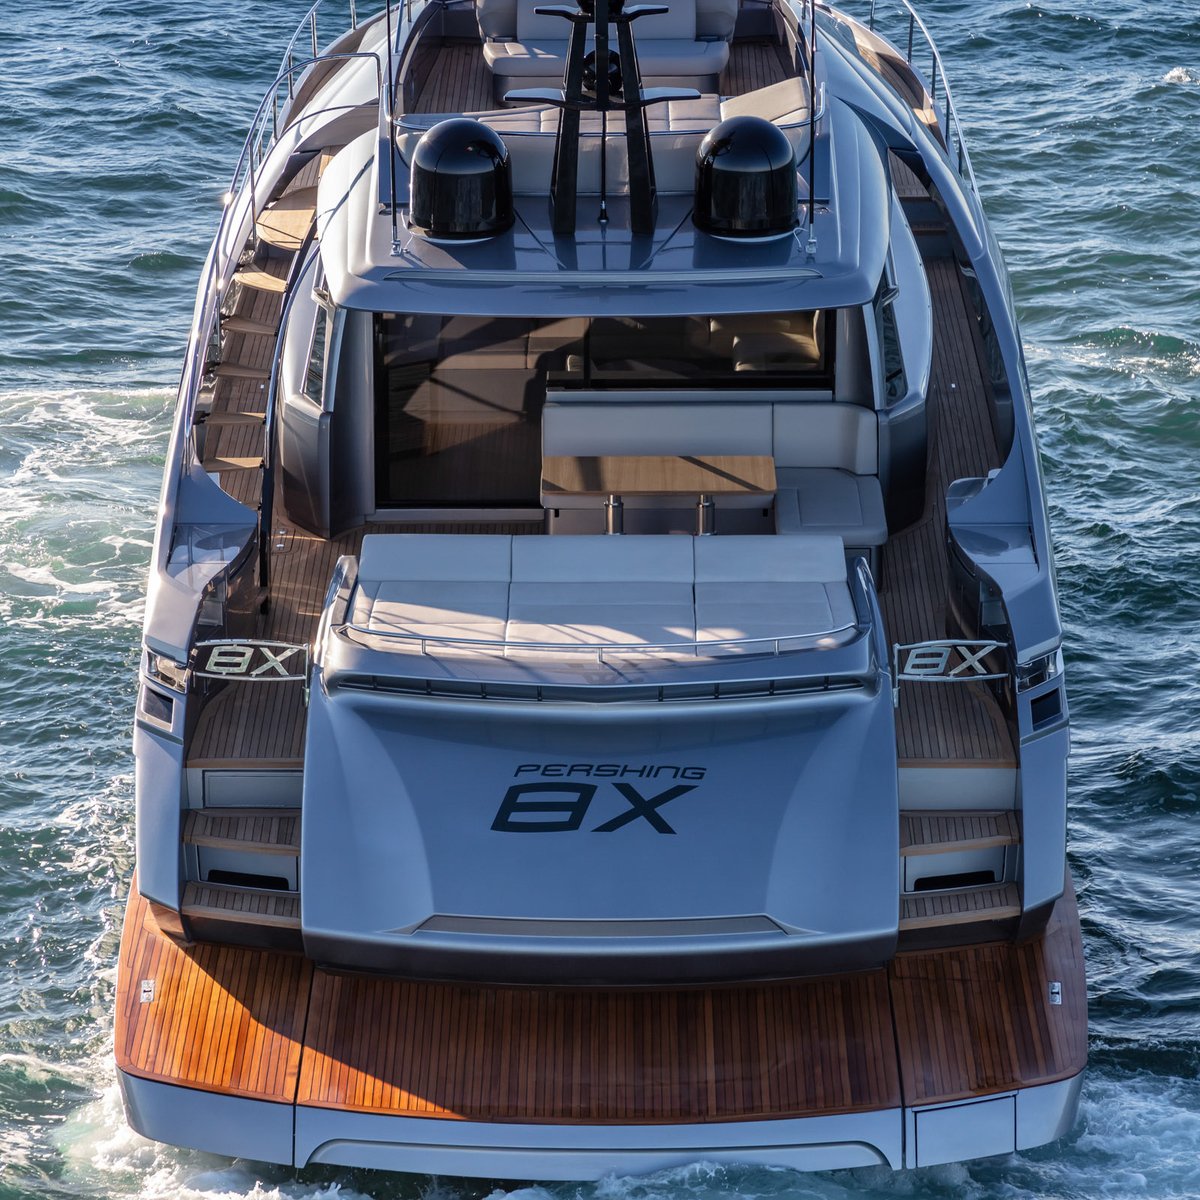 Savoring the essence of refined indulgence aboard the magnificent 83' Pershing 8X. Elevating maritime luxury to new heights. Contact us for further details on purchasing this 83' Pershing: sales@yachtsblue.com
hubs.ly/Q029DzMj0

#Pershing8X #YachtsBlue